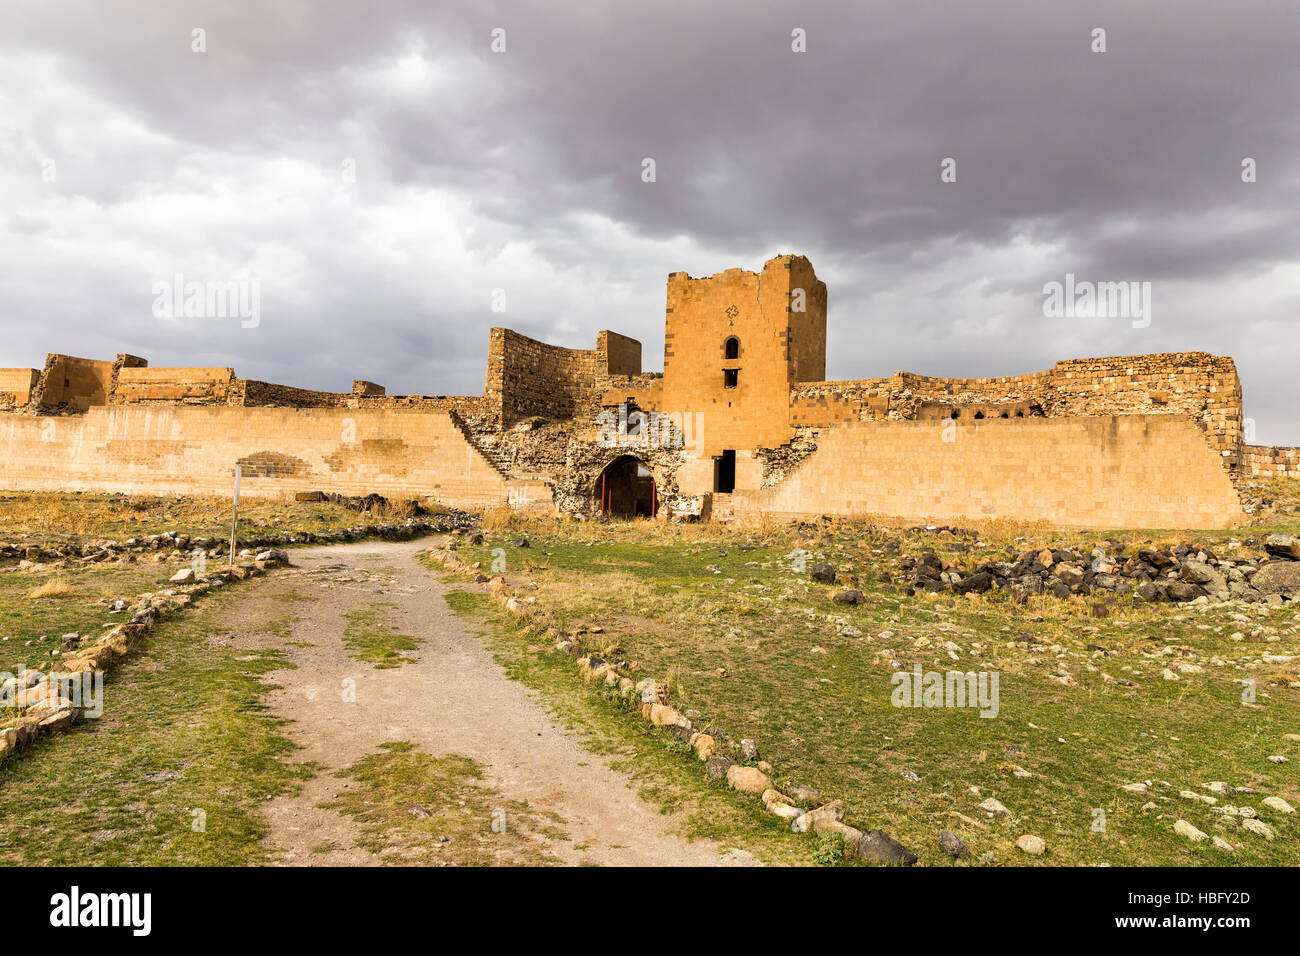 The castle wall ruins of Ani. Ani is a ruined medieval Armenian city situated in the Turkish province of Kars Stock Photo